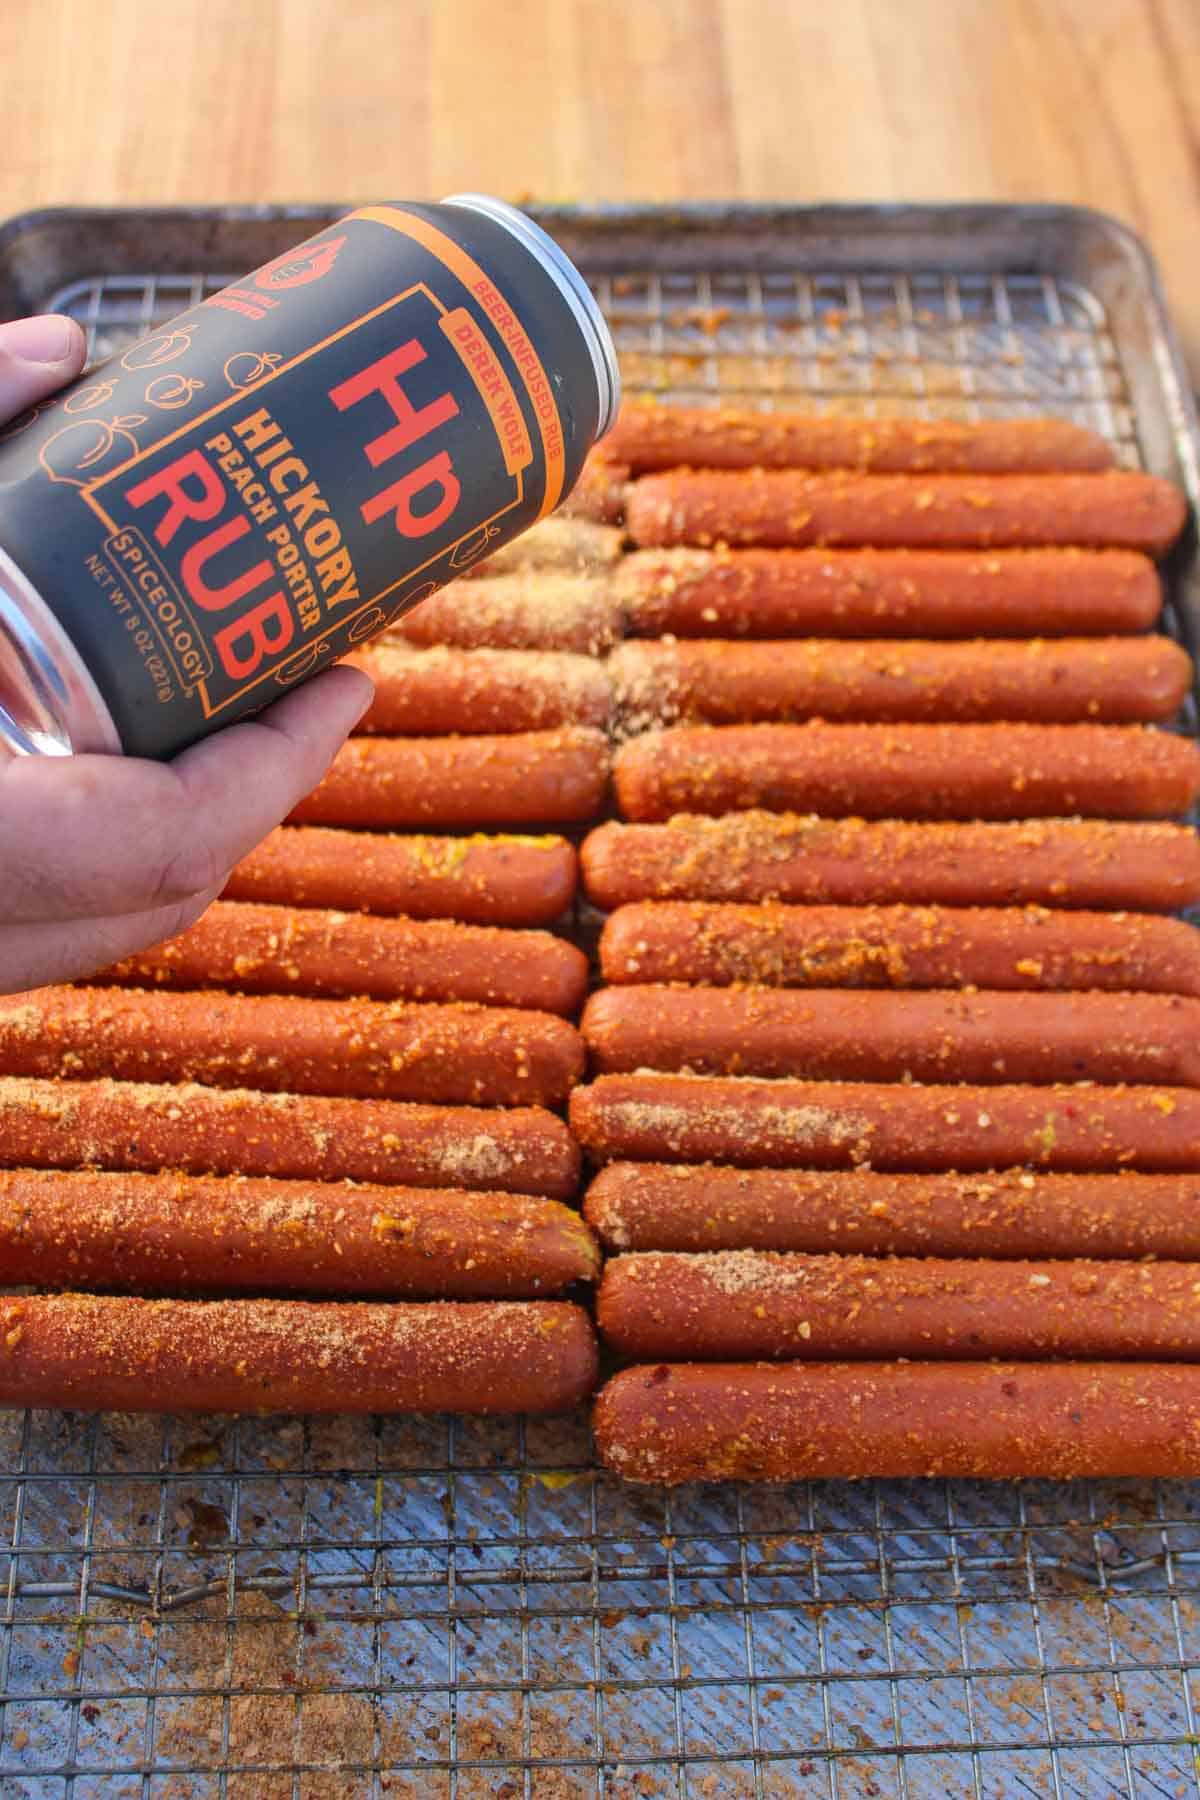 Lathering the hot dogs down with Derek's Hickory Peach Porter Rub.